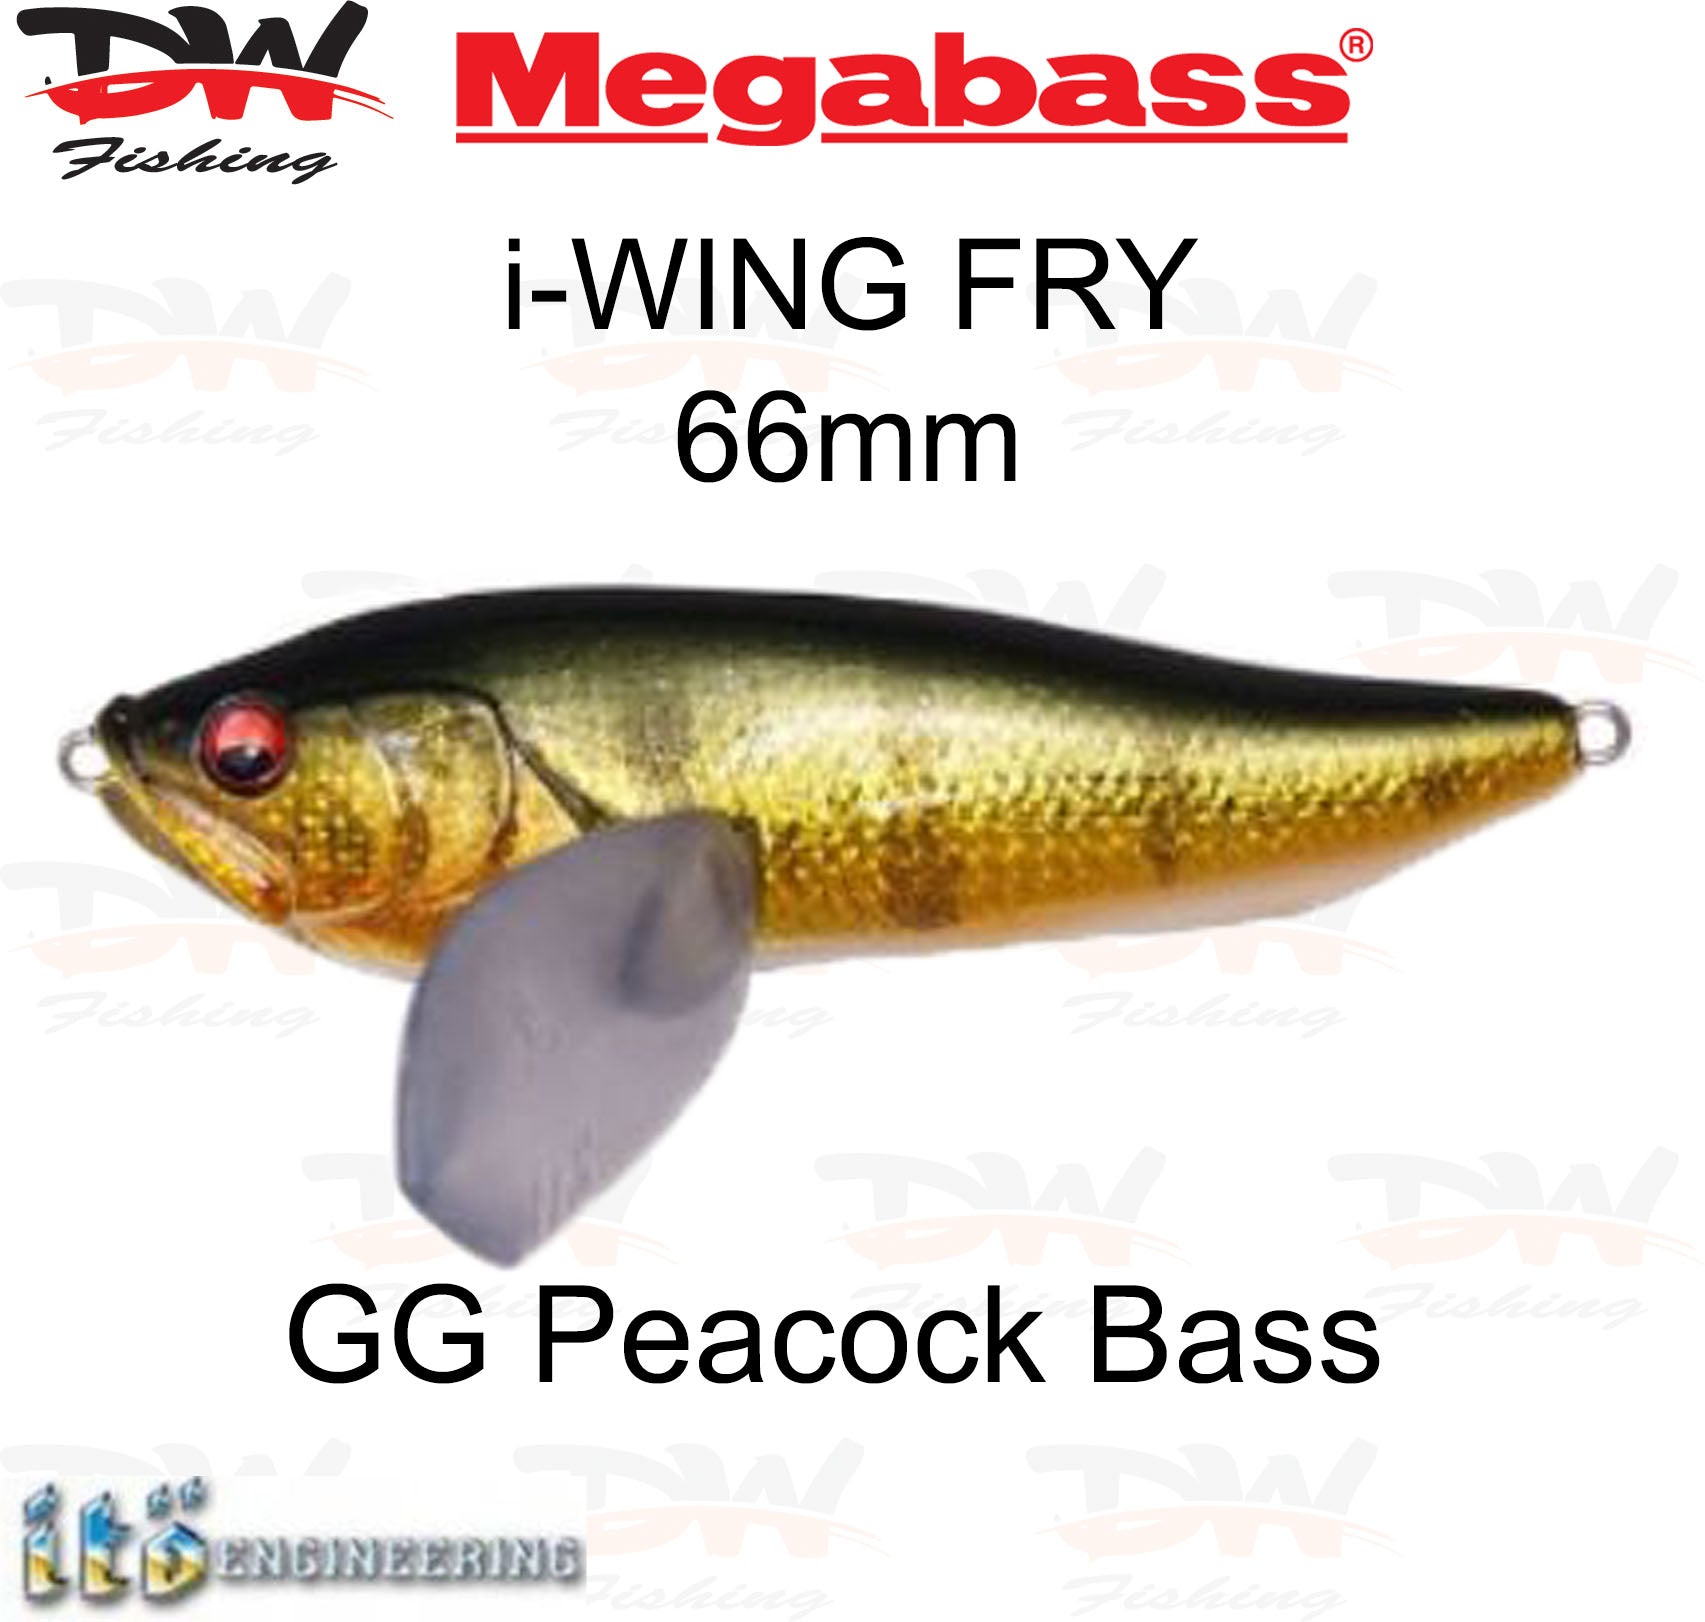 Megabass i-WING FRY surface lure single colour GG Peacock Bass